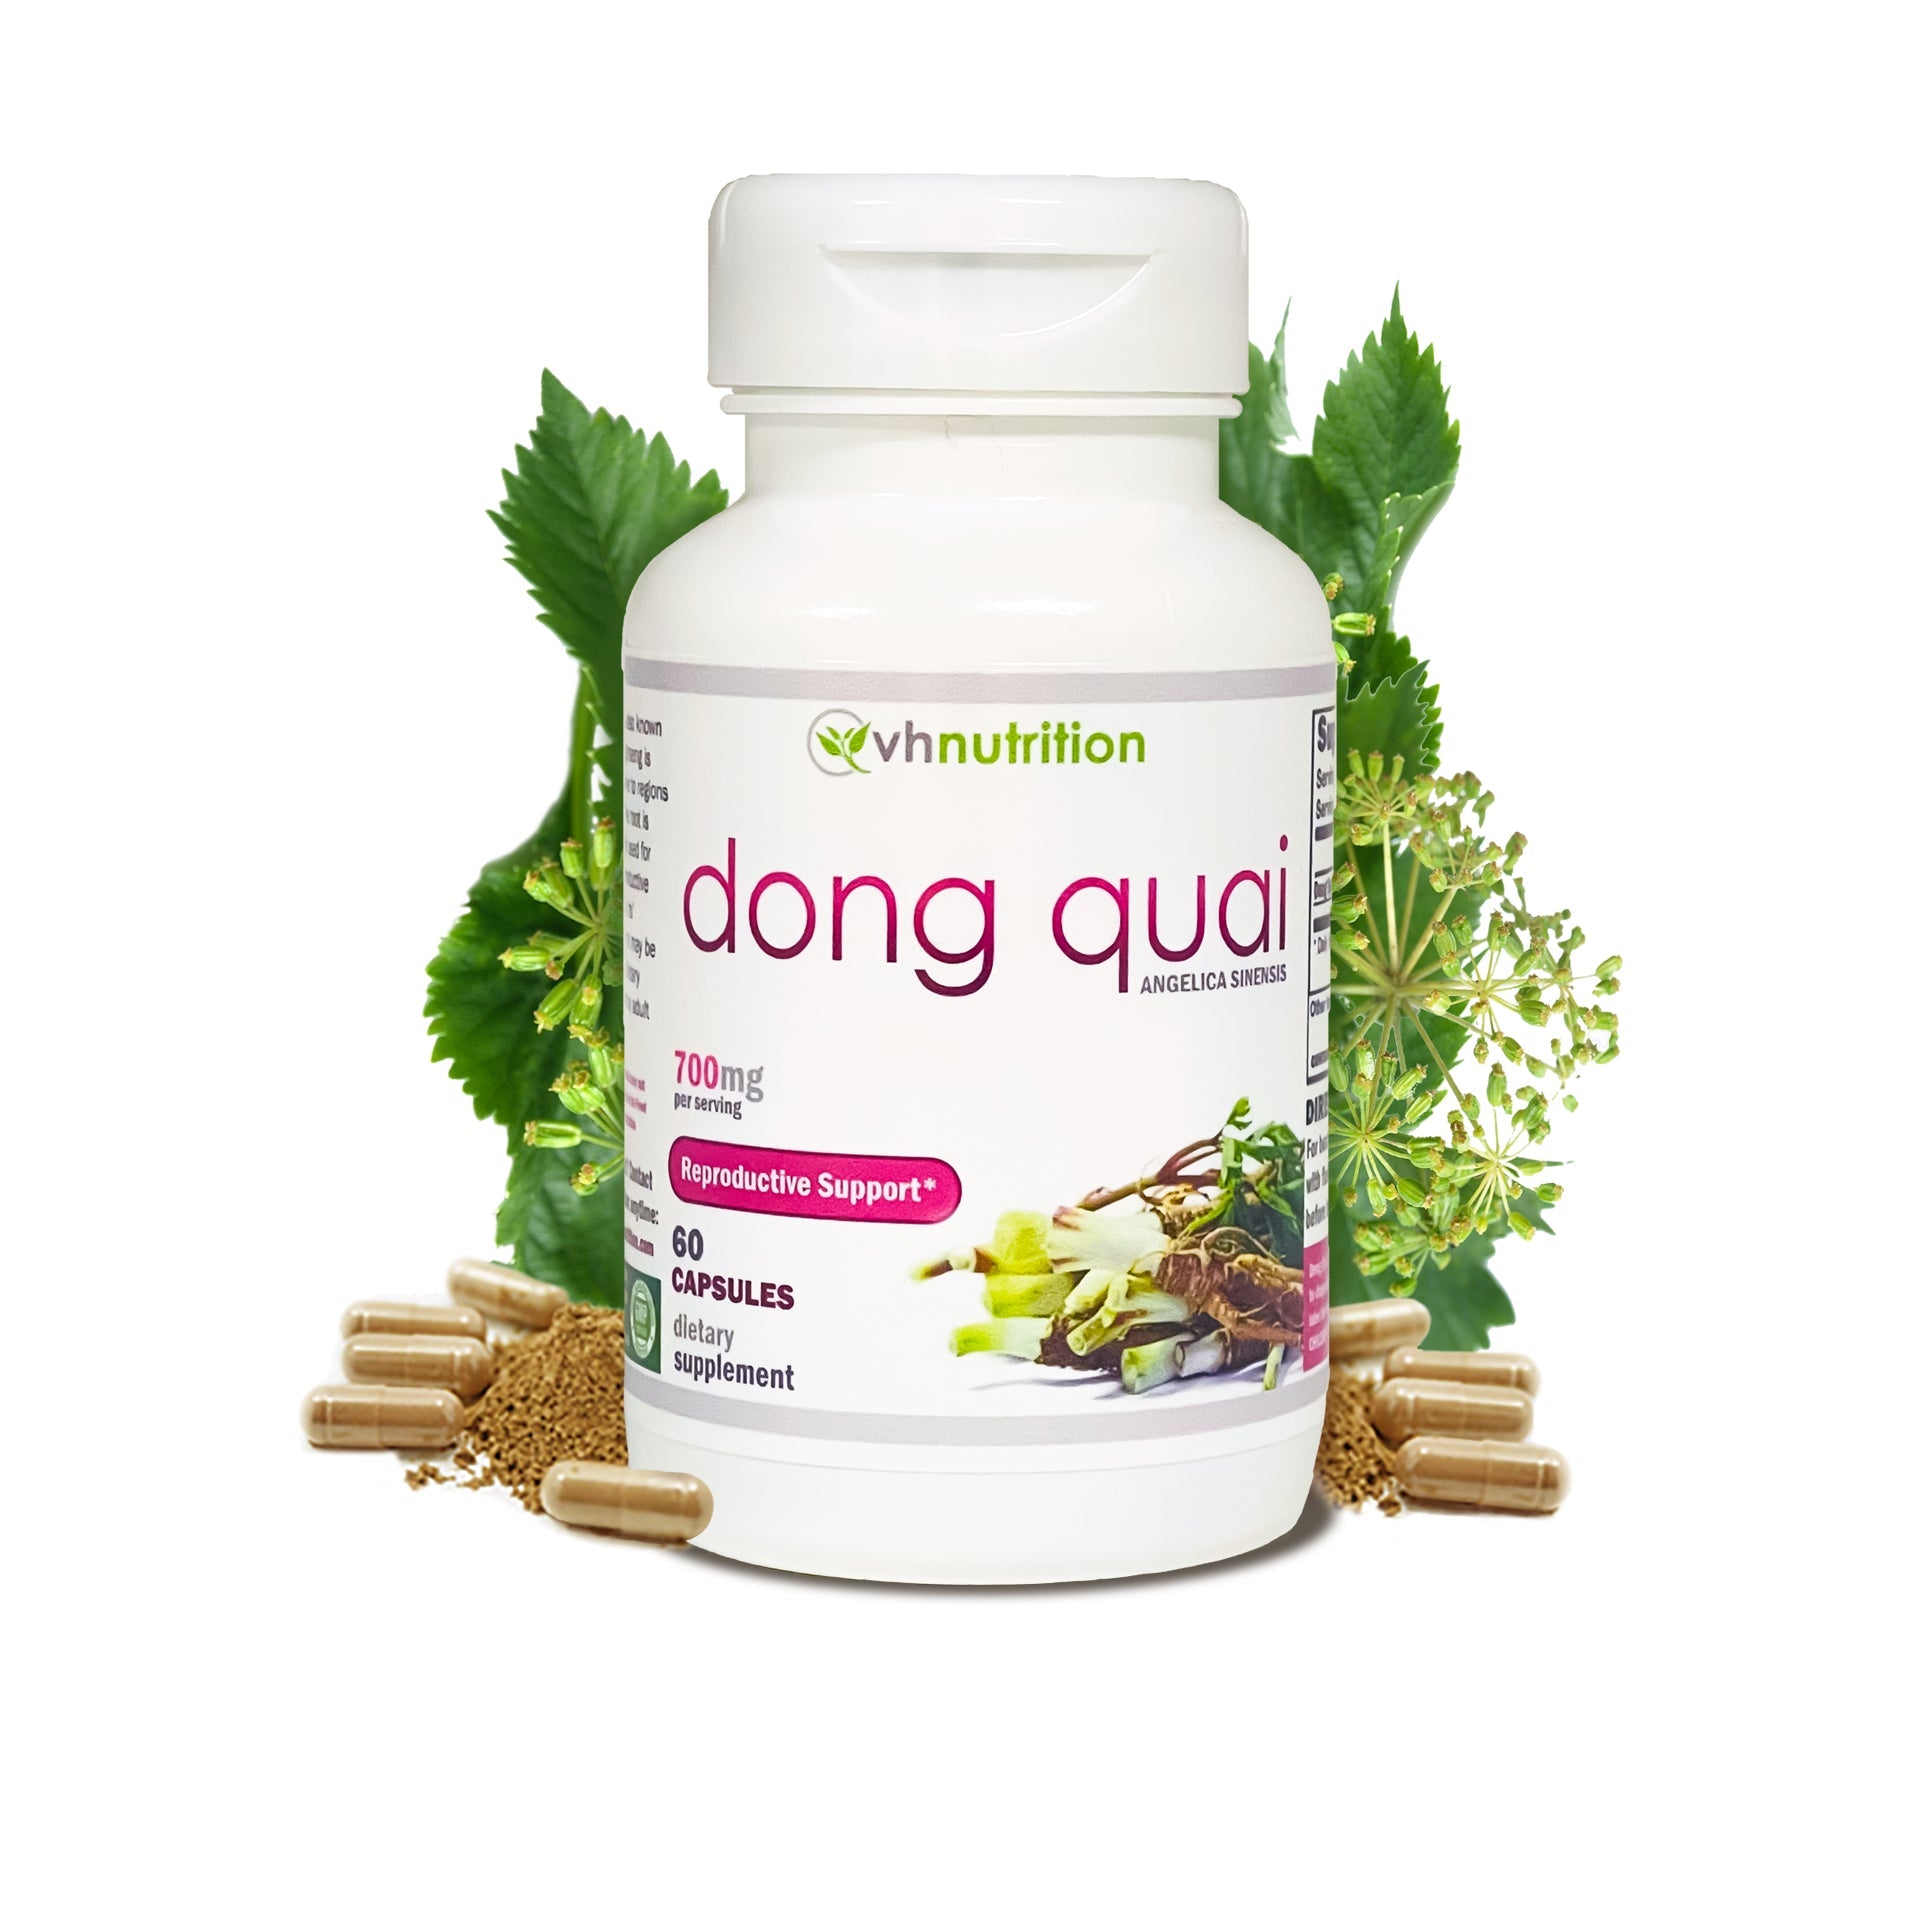 VH Nutrition DONG QUAI | Reproductive Support* Supplement | Fertility Aid* for Women | 700mg Proprietary Formula | 60 Capsules